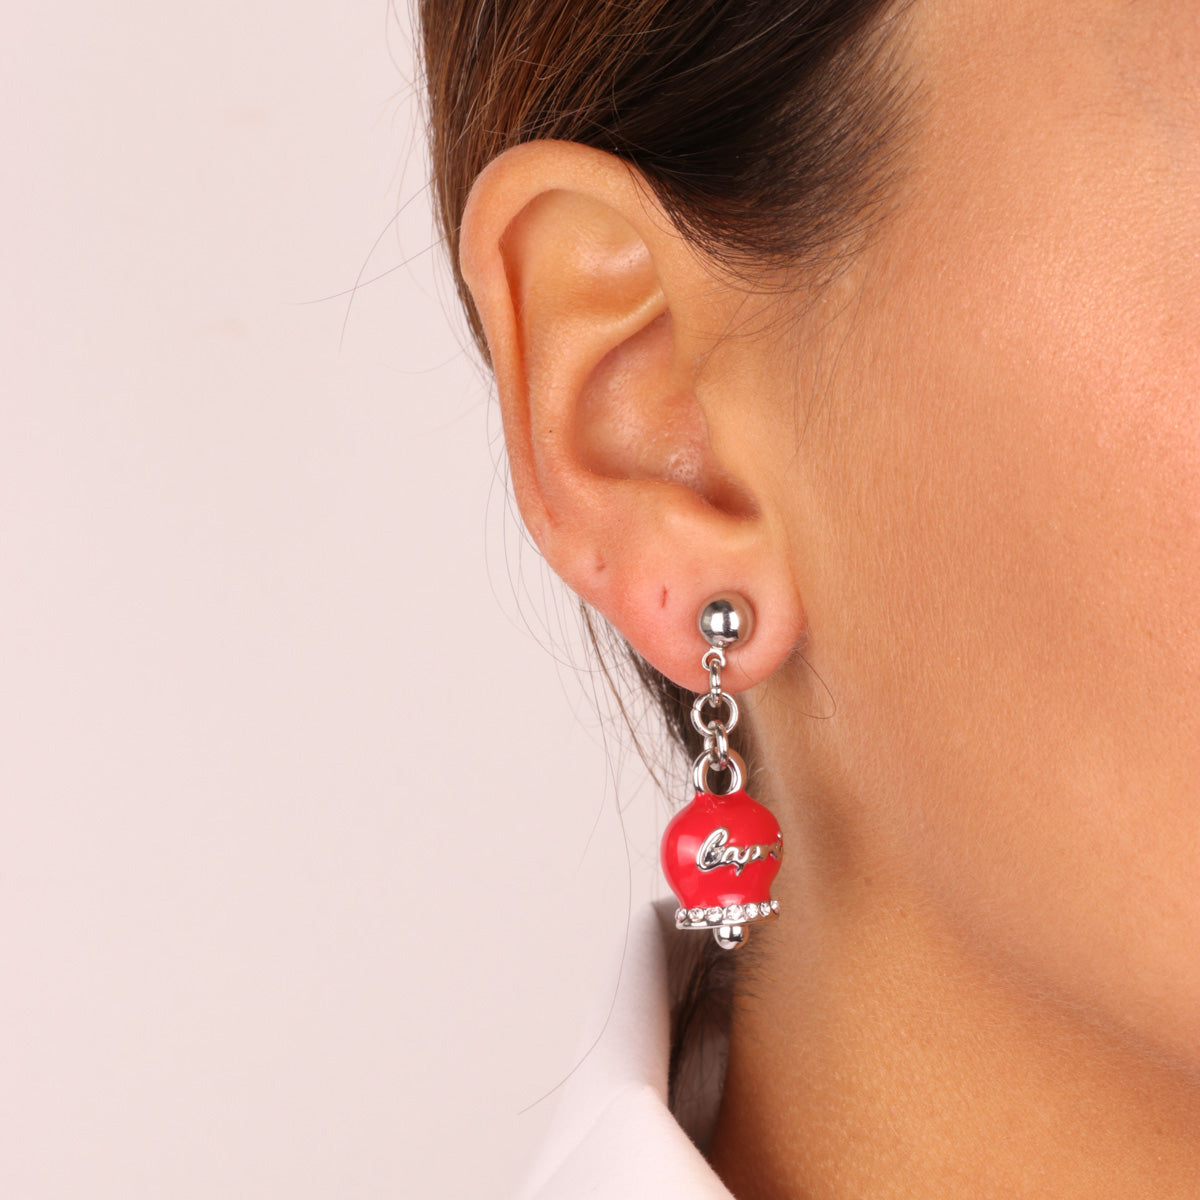 Metal earrings with bell pendant red enamel, embellished with crystals